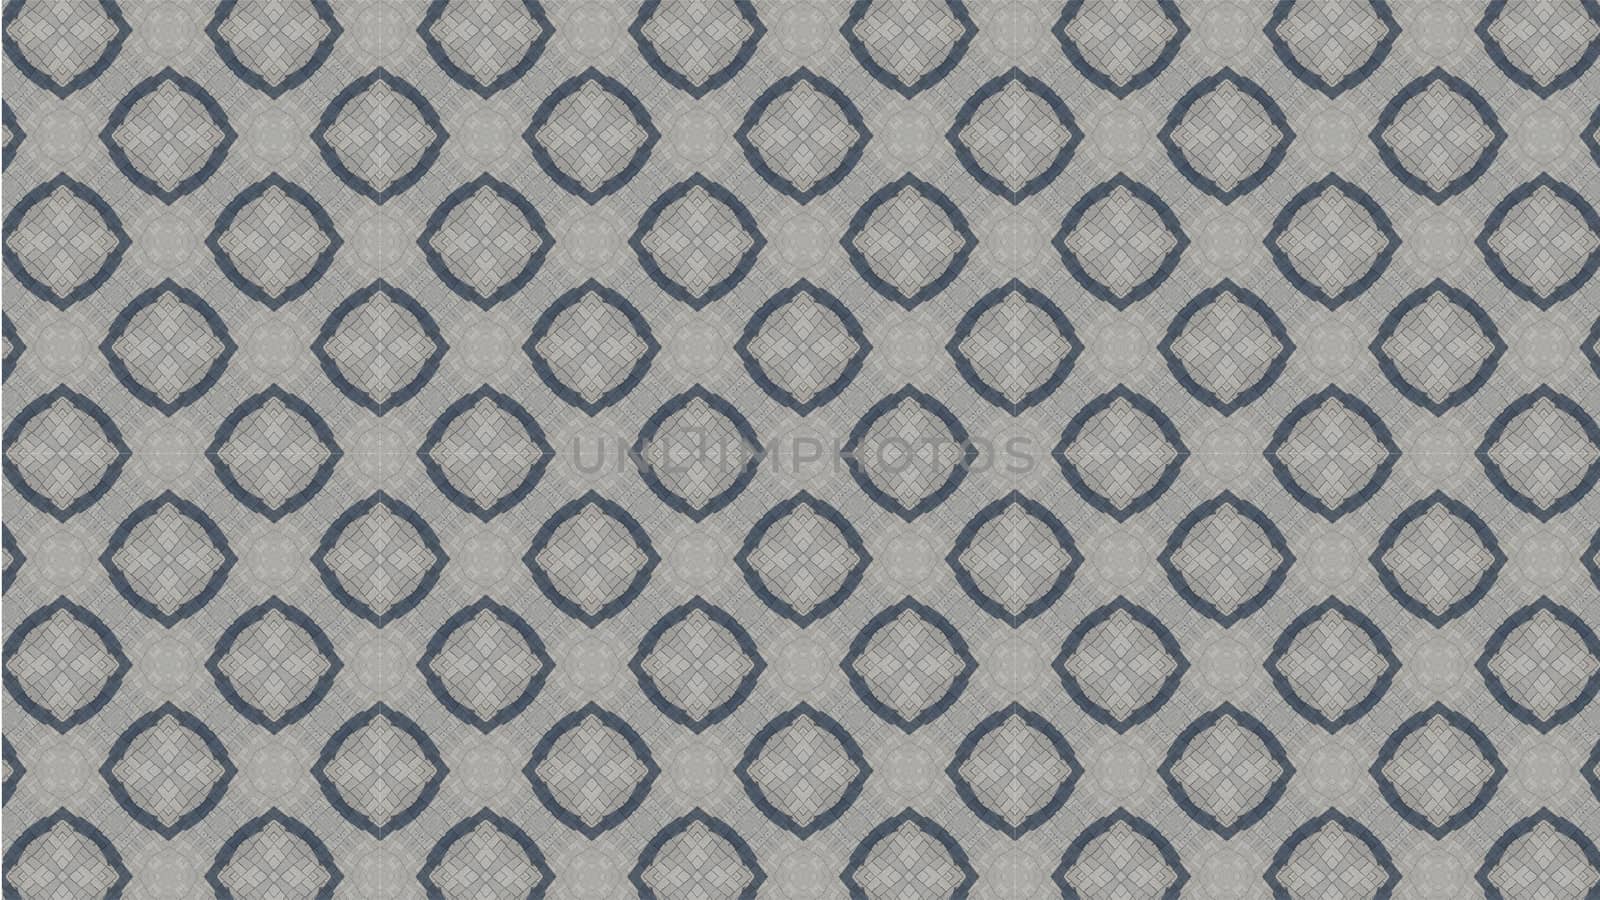 Lovely geometric shpae pattern for designs to be use in textile by Photochowk